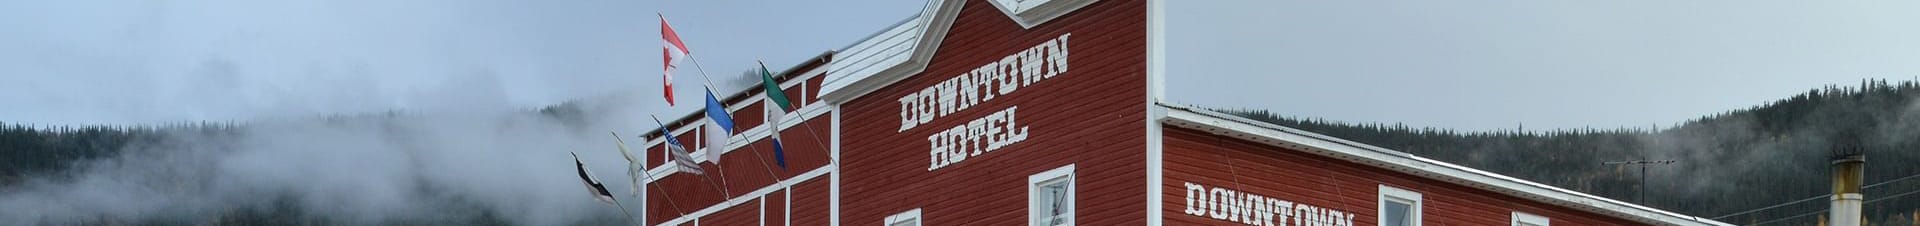 Hotels Downtown.